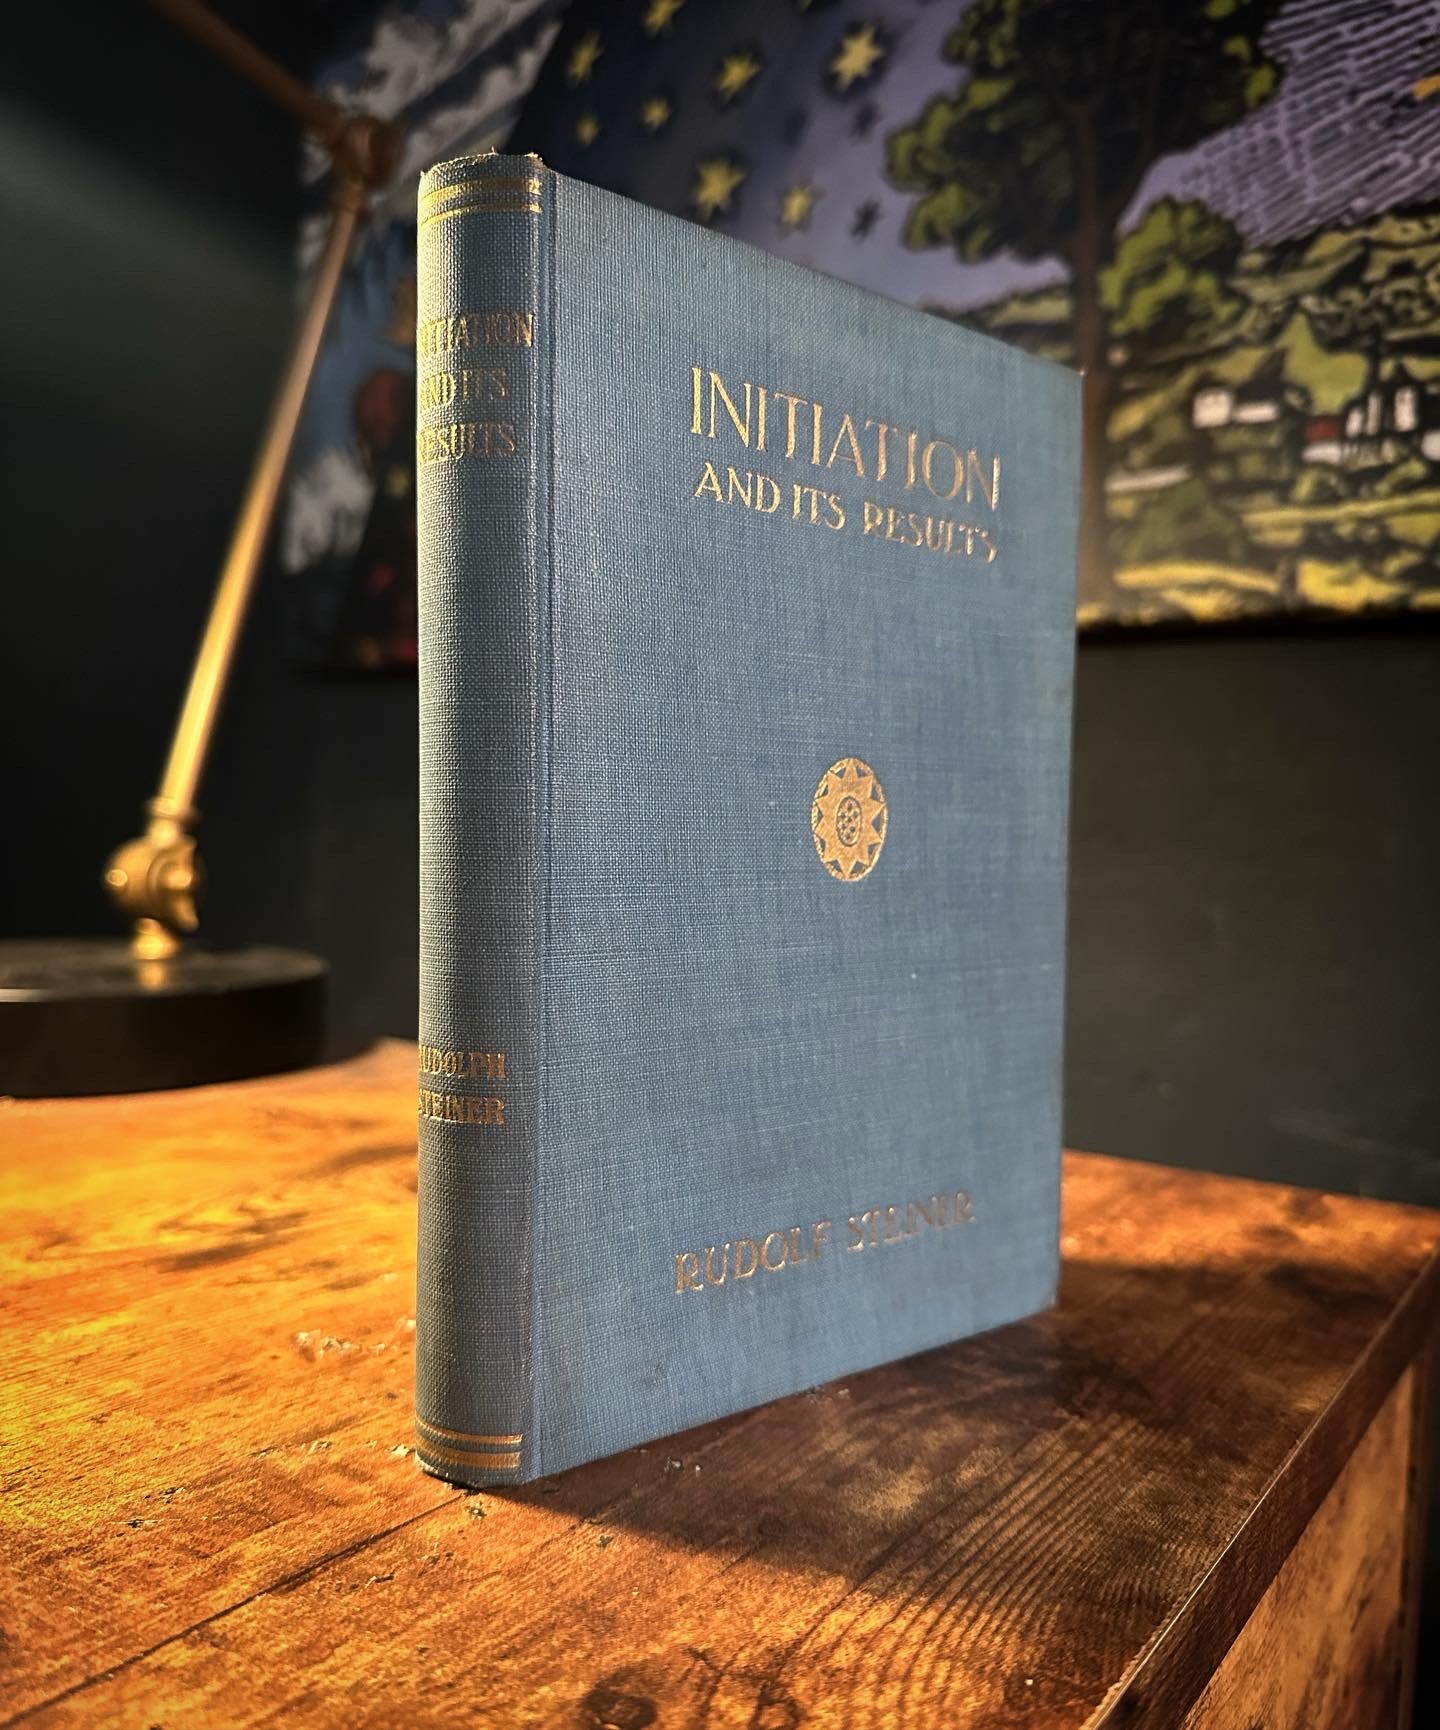 Initiation and Its Results (First American Edition)  by Rudolf Steiner